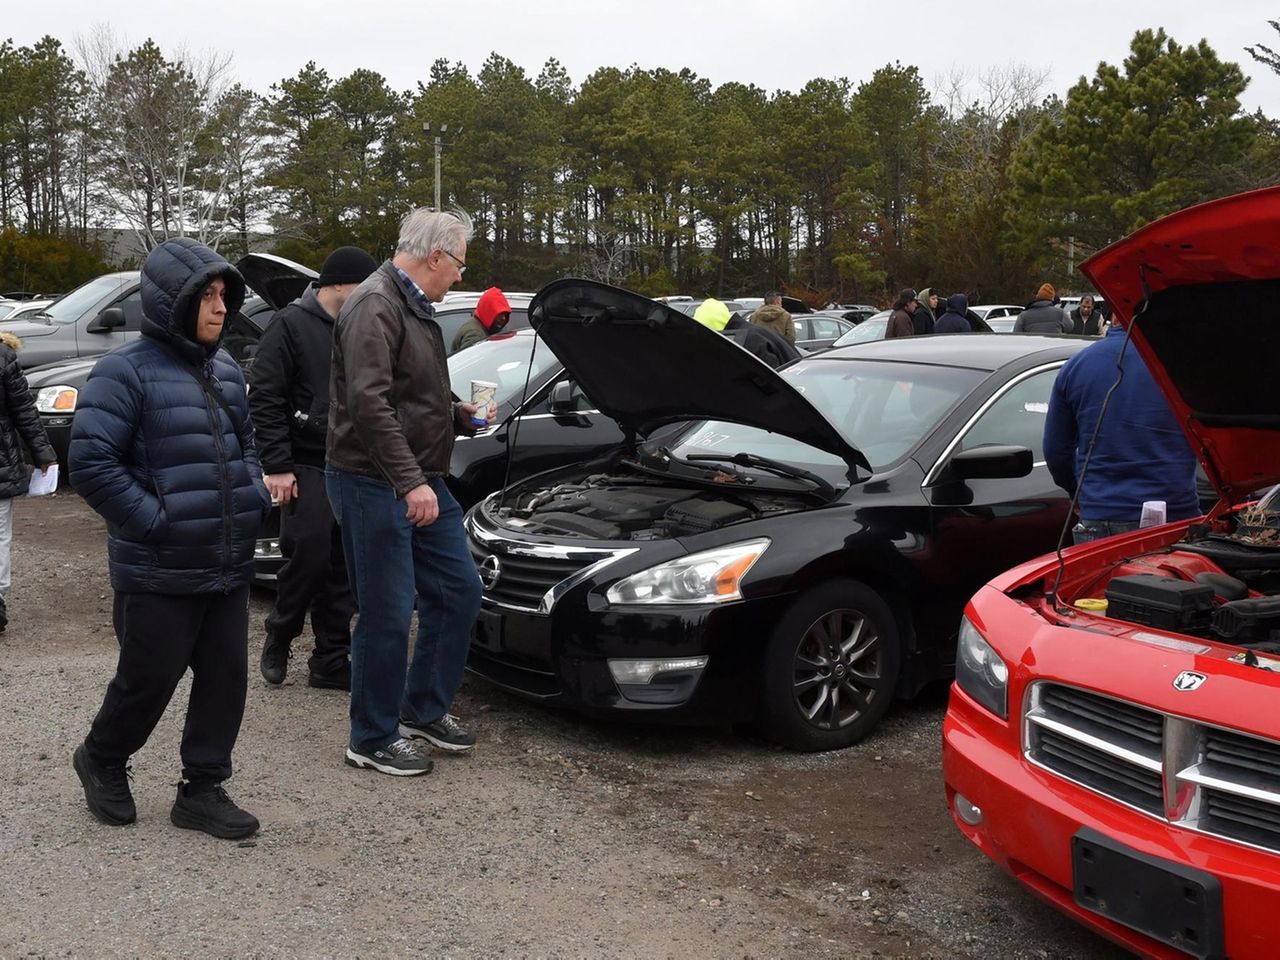 Suffolk County Police to hold vehicle auction June 25